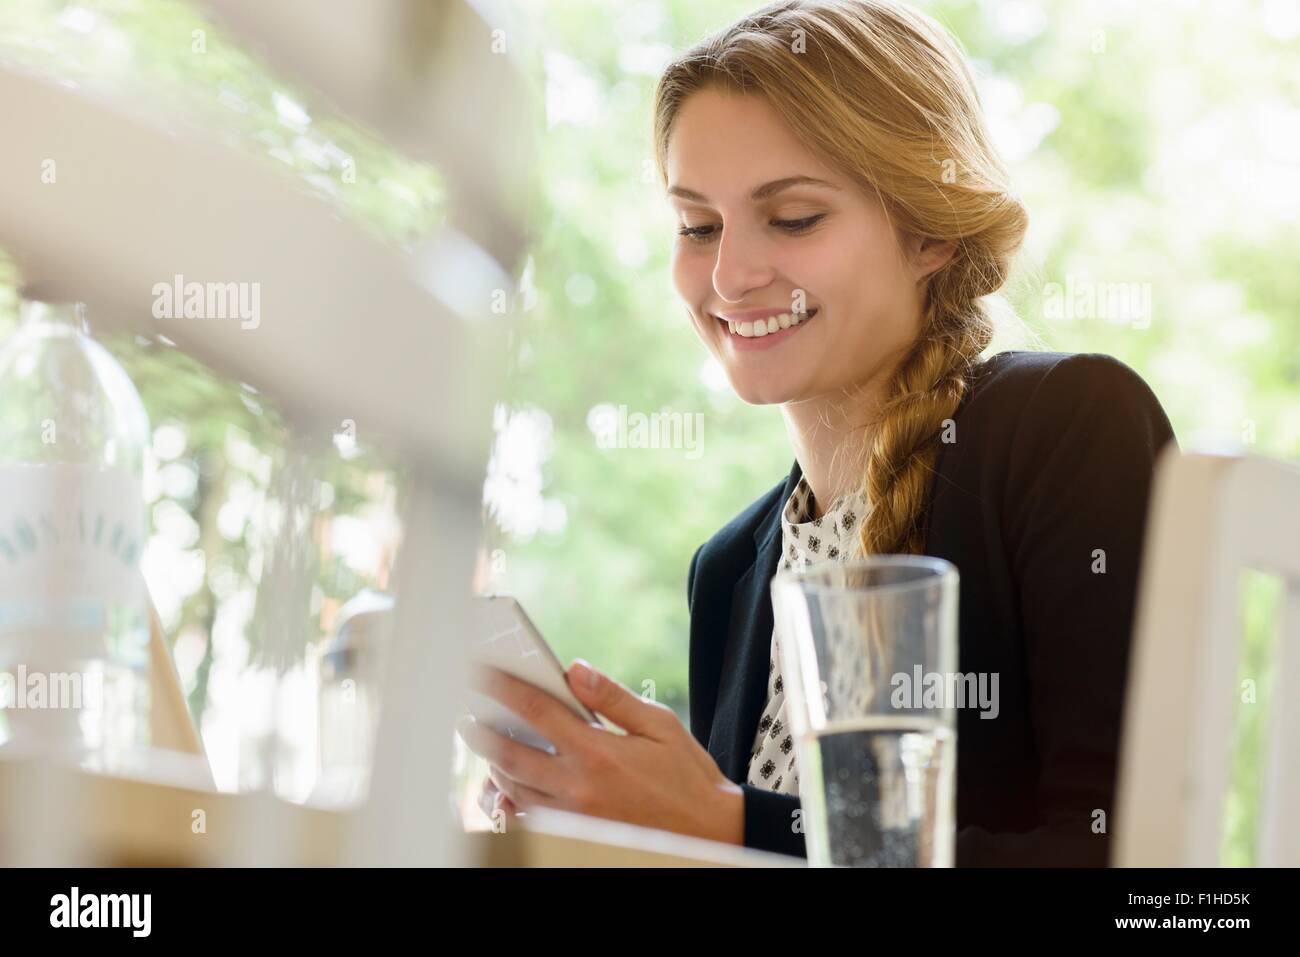 Young woman in cafe reading texts on smartphone Stock Photo